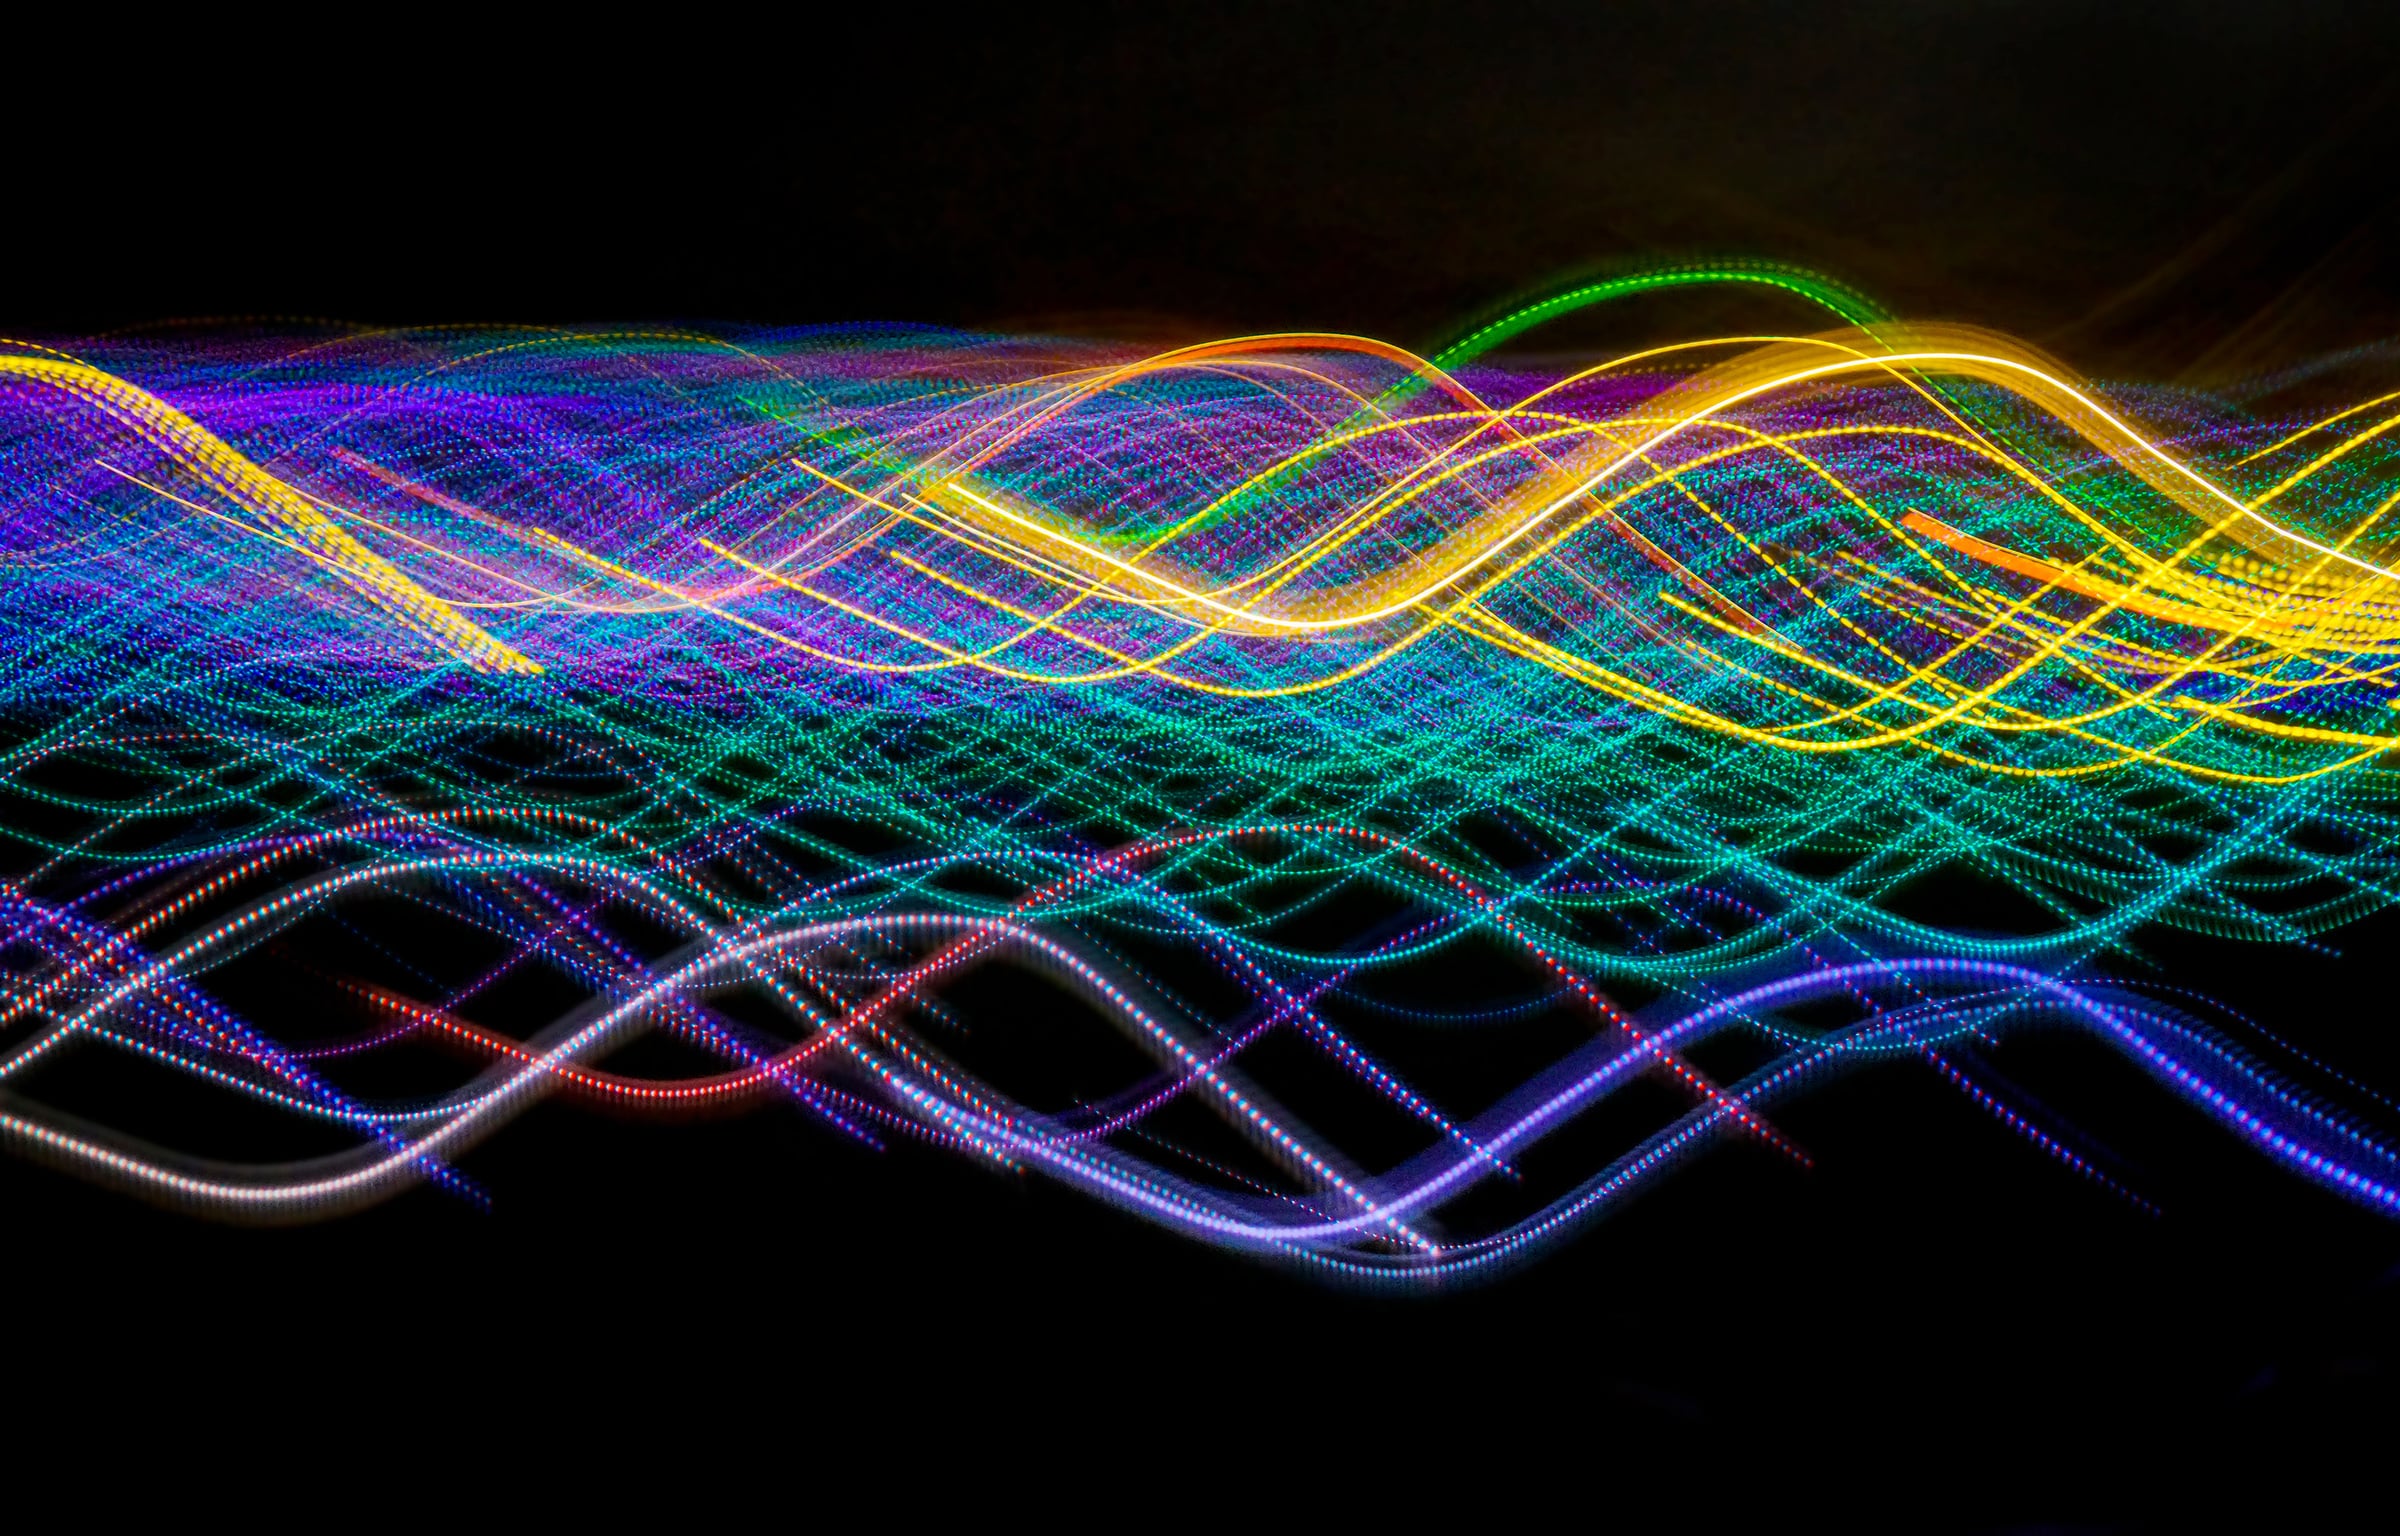 Colorful laser lights in motion flowing in a pattern.